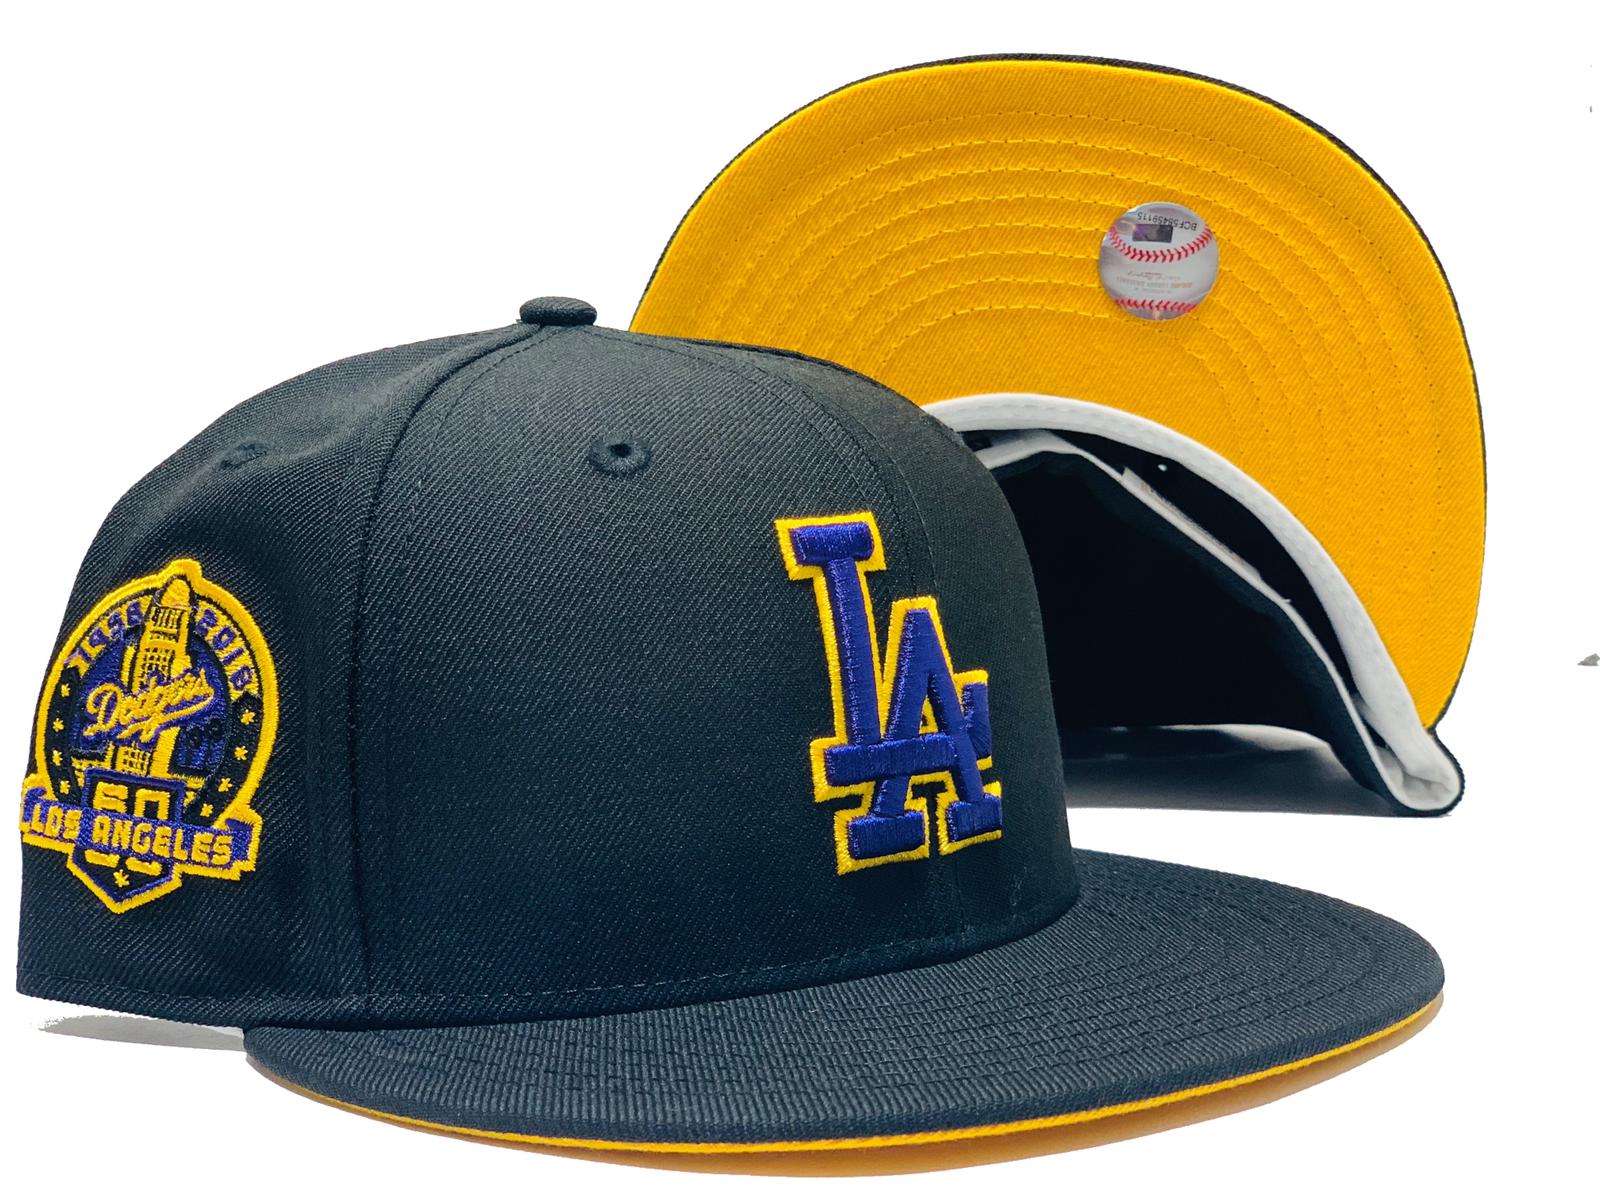 LOS ANGELES DODGERS 60TH SEASON YELLOW BRIM NEW ERA FITTED HAT